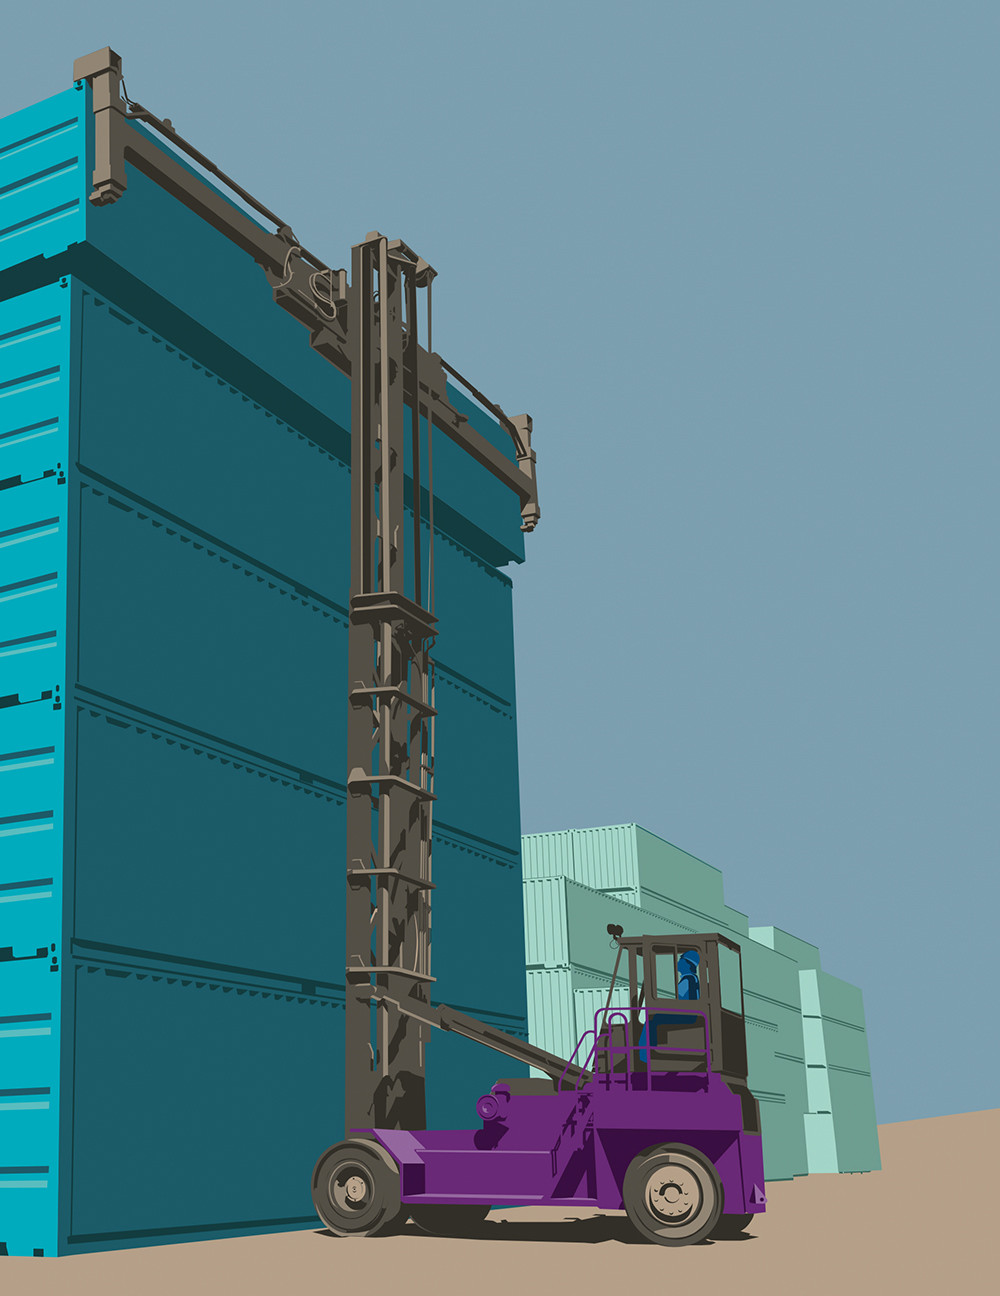 Illustration of a forklift truck next to a building